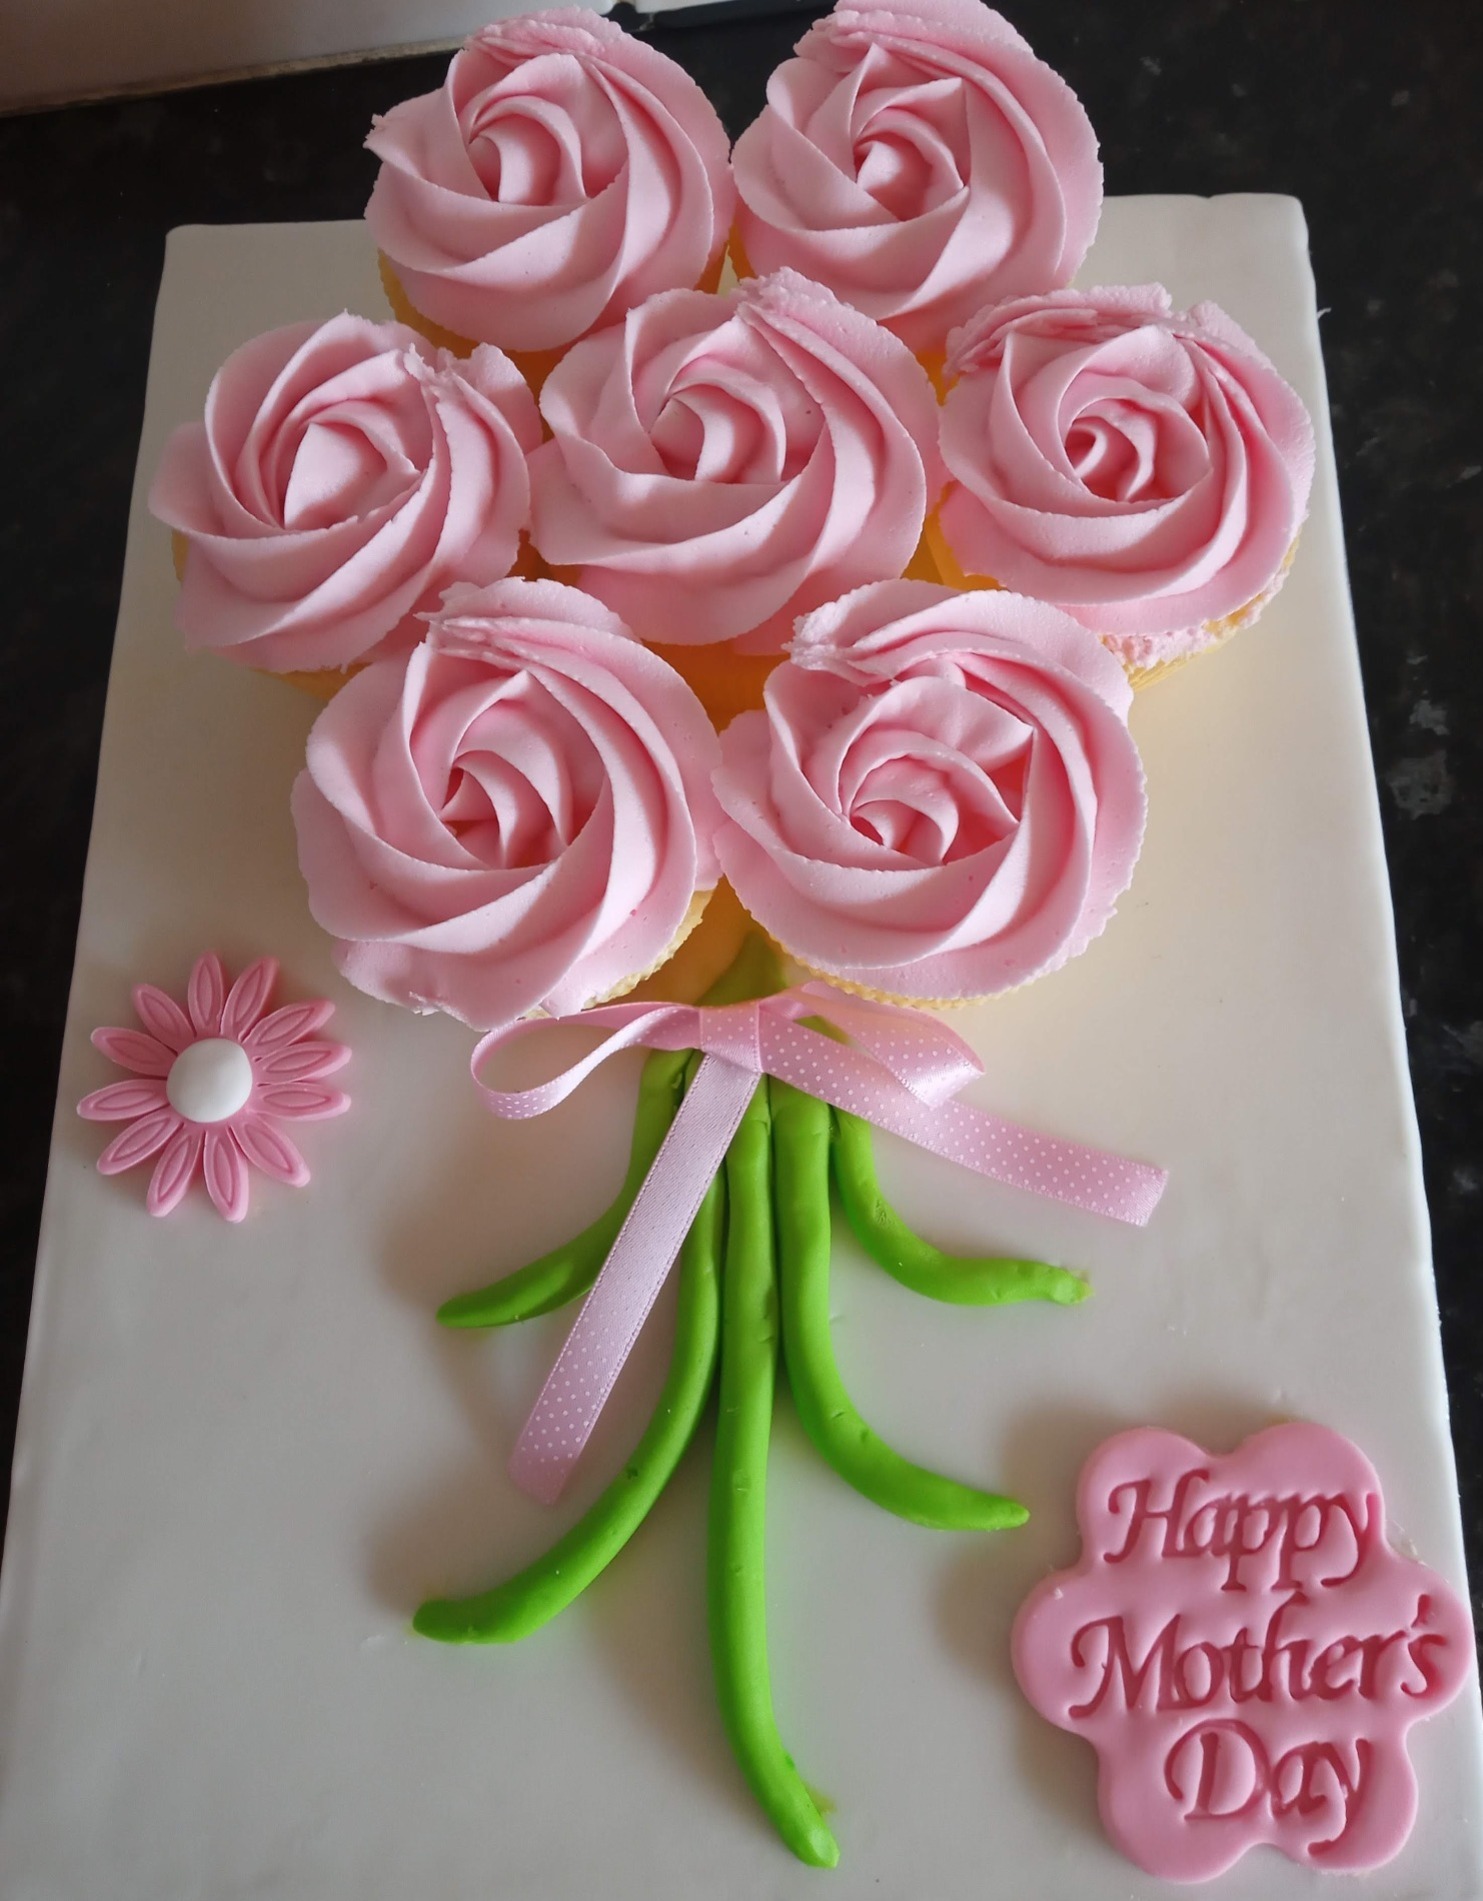 Mothers day cupcake bouquet-Baby pink rose swirl